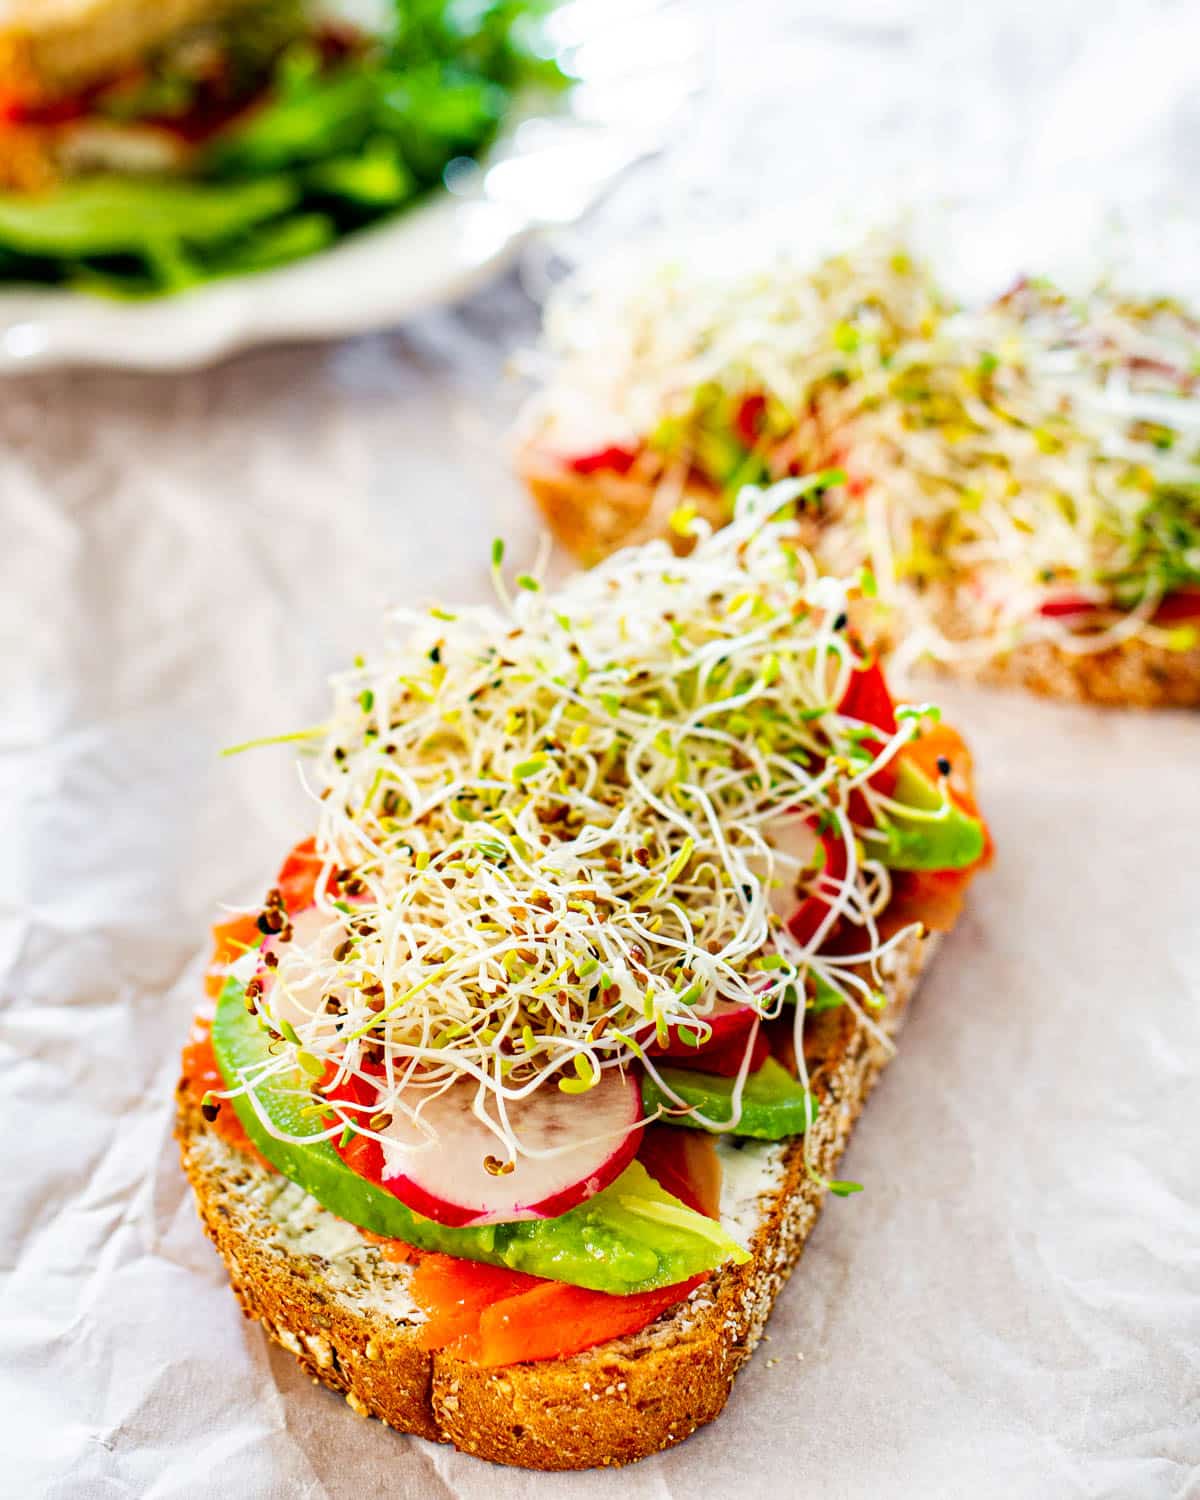 open faced sandwich with smoked salmon and veggies